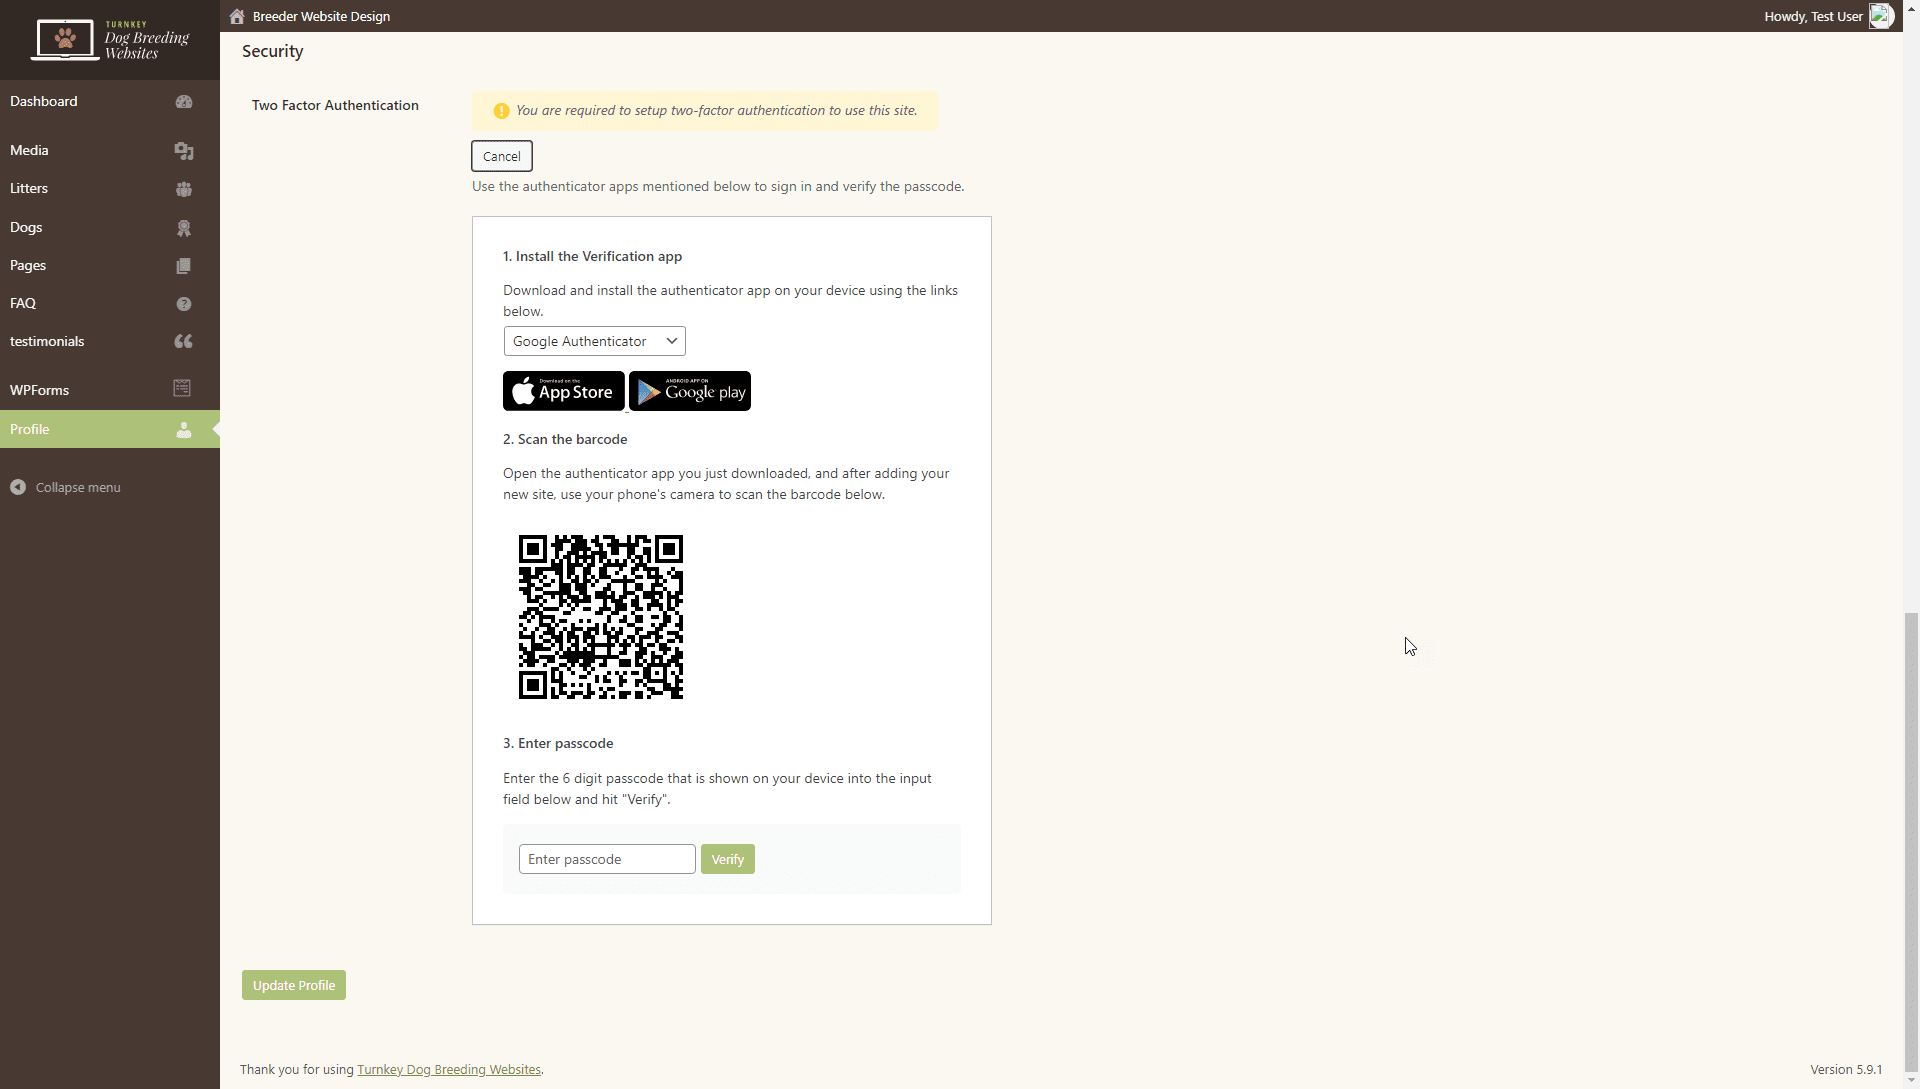 Two Factor Authentication Screenshot